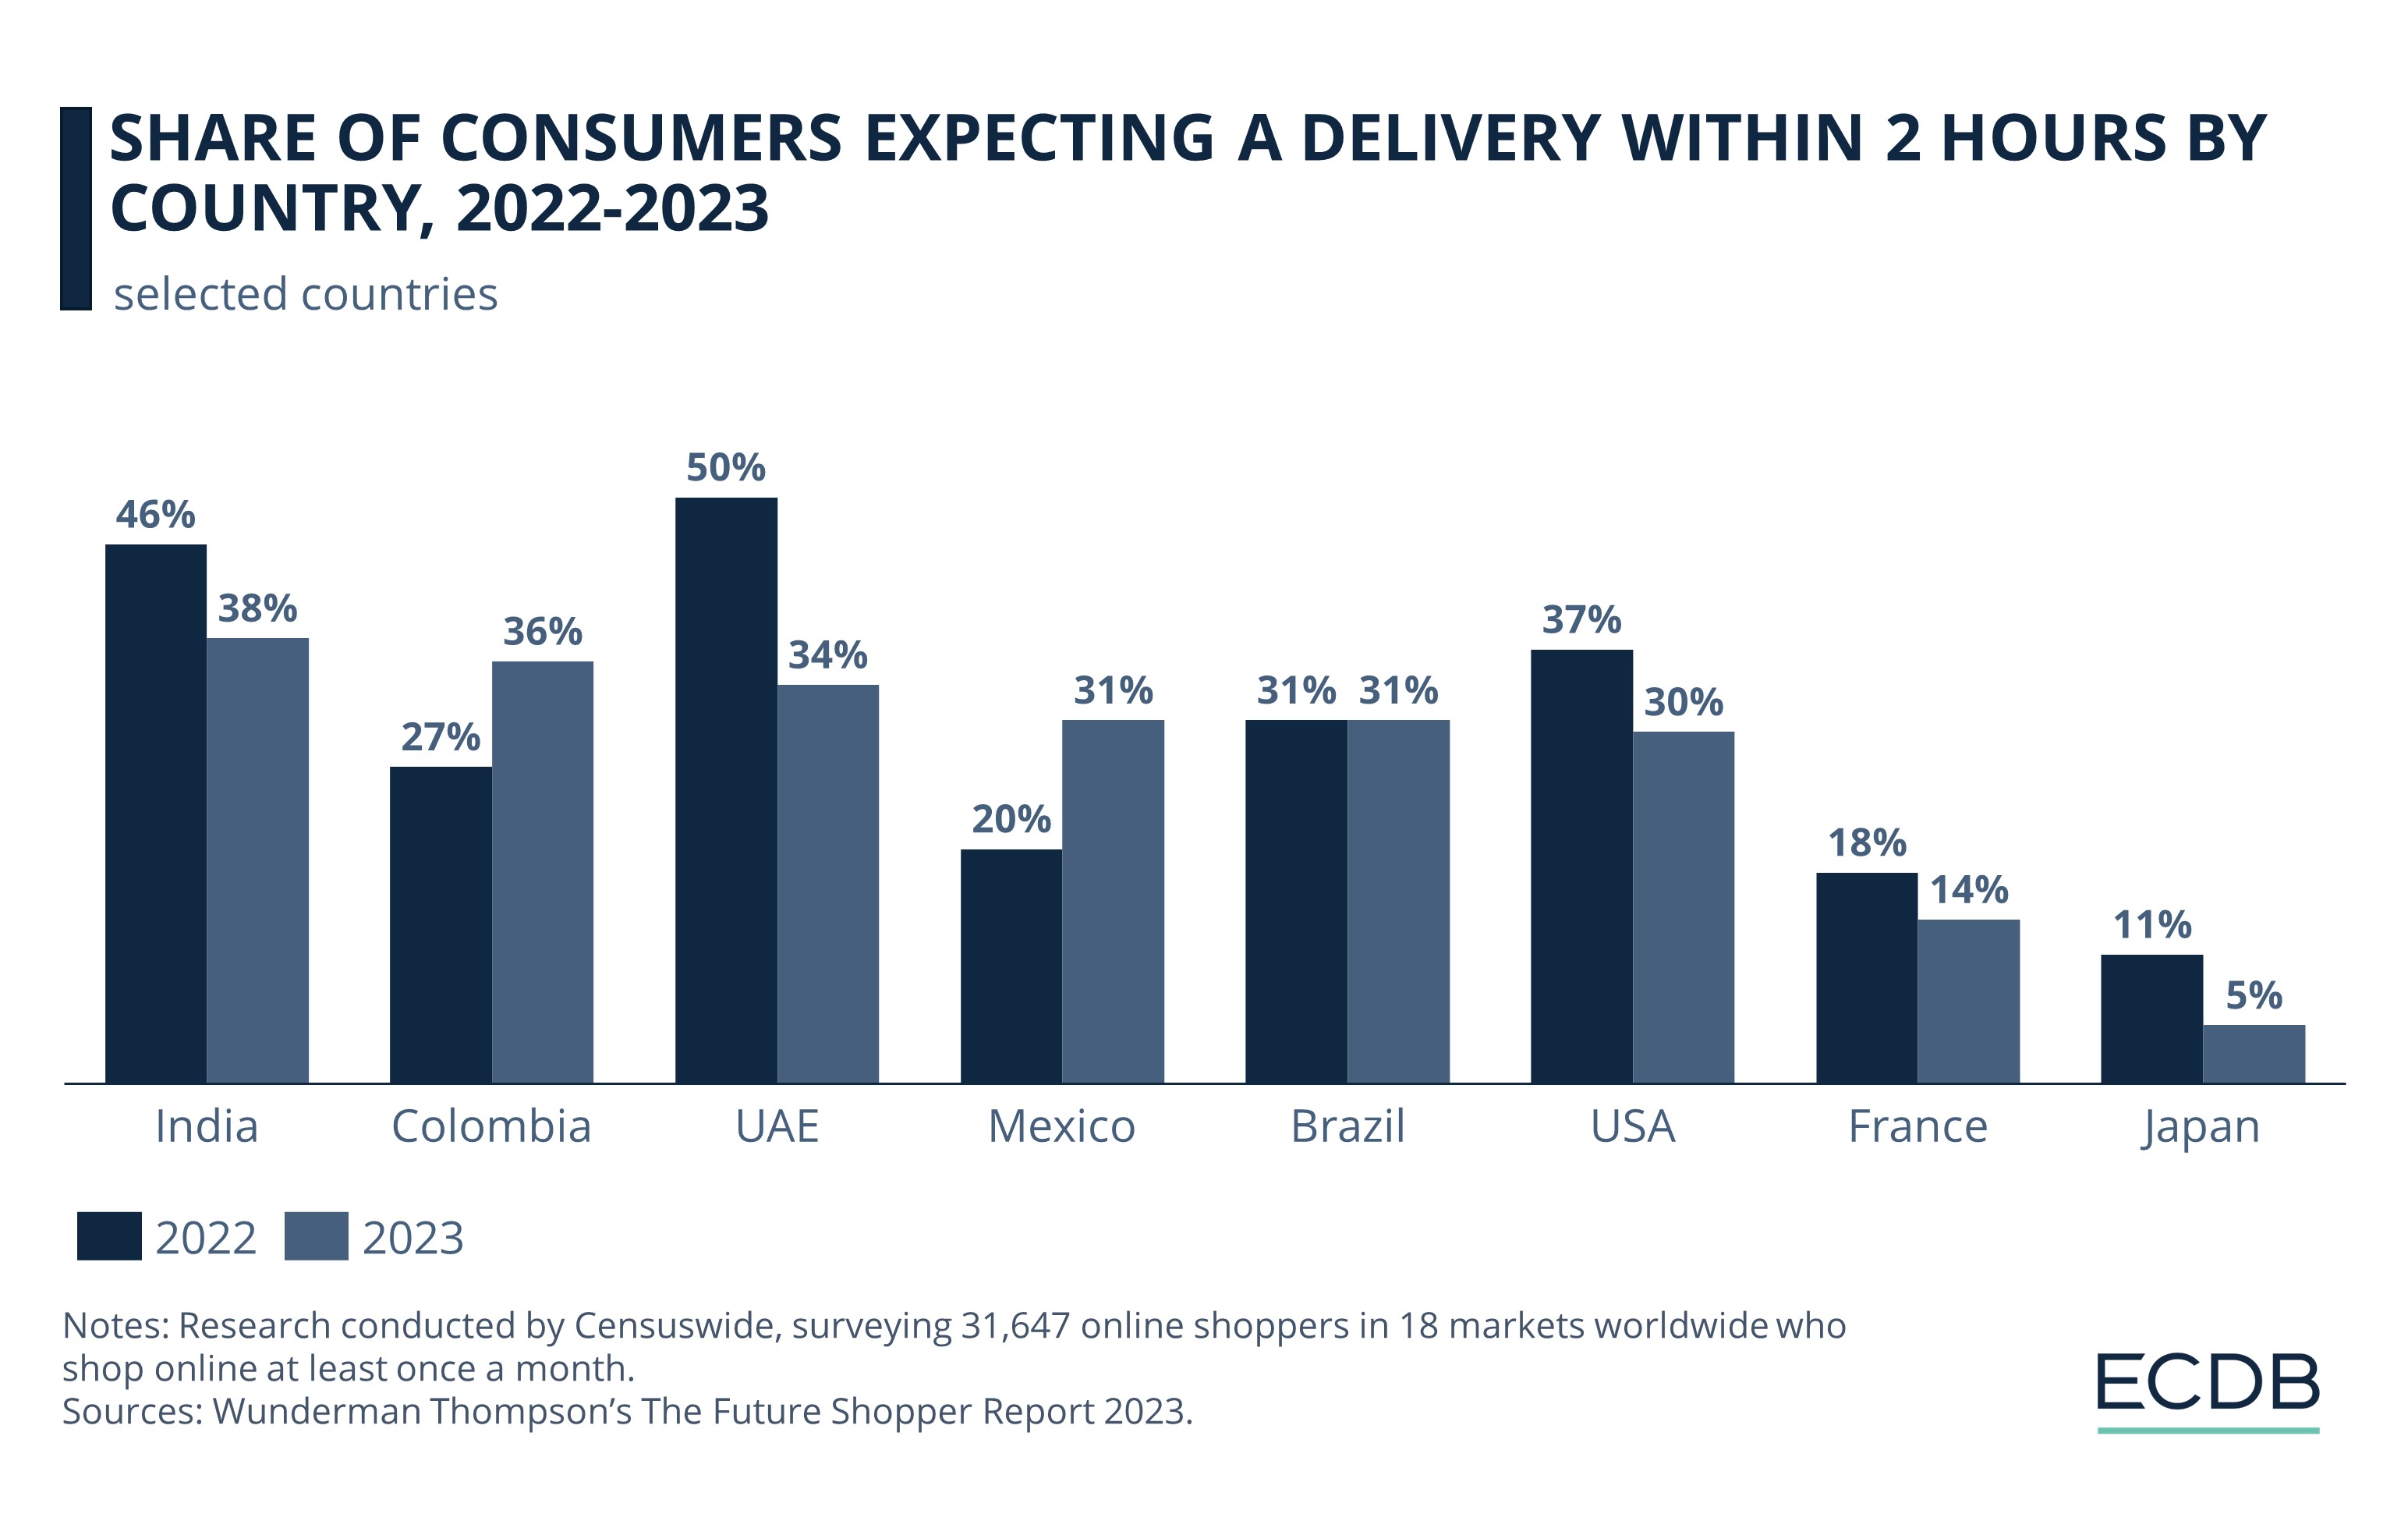 Share of Consumers Expecting a Delivery within 2 Hours by Country, 2022-2023